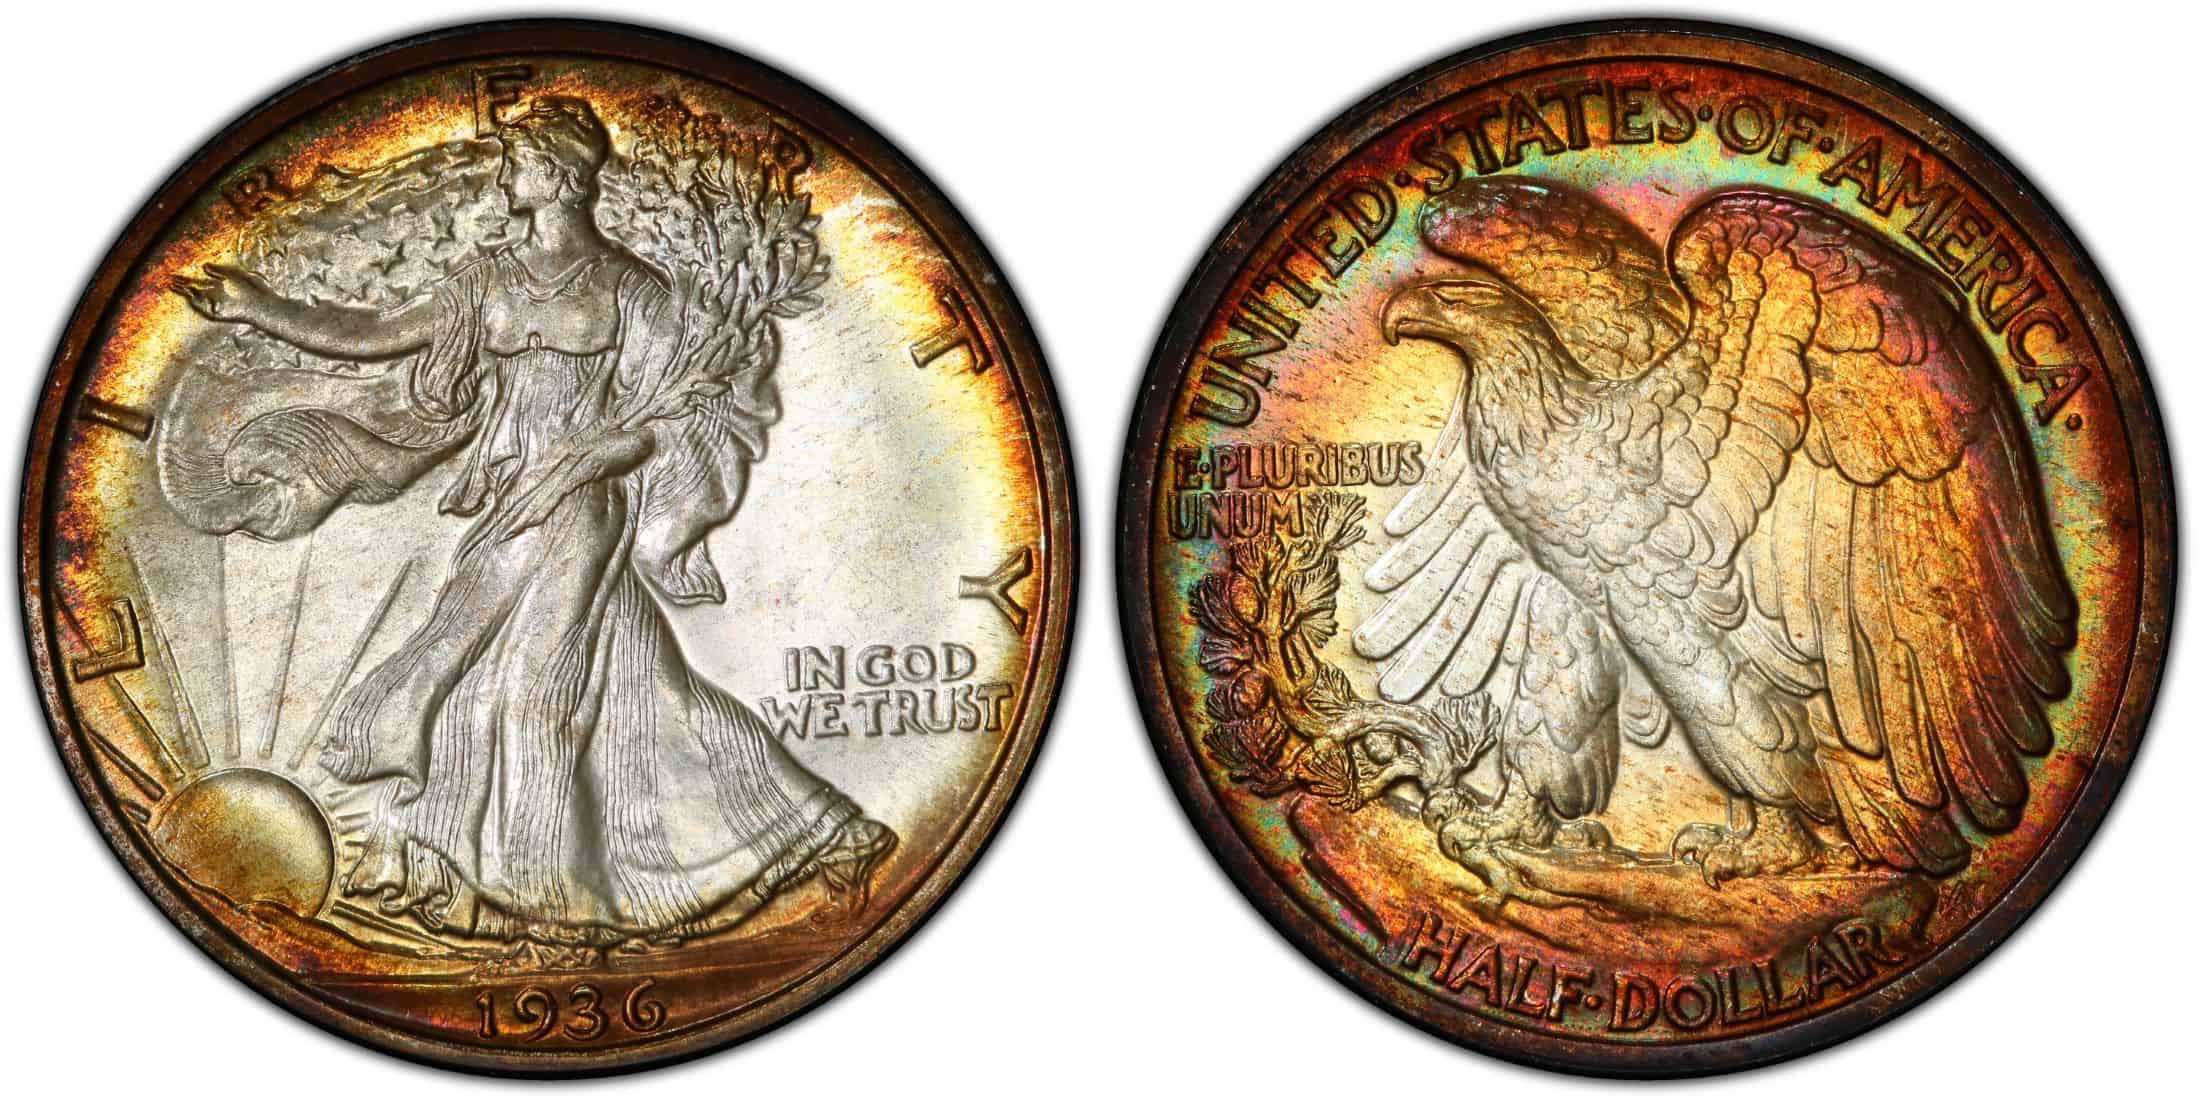 Places that Mint the 1936 Half Dollar